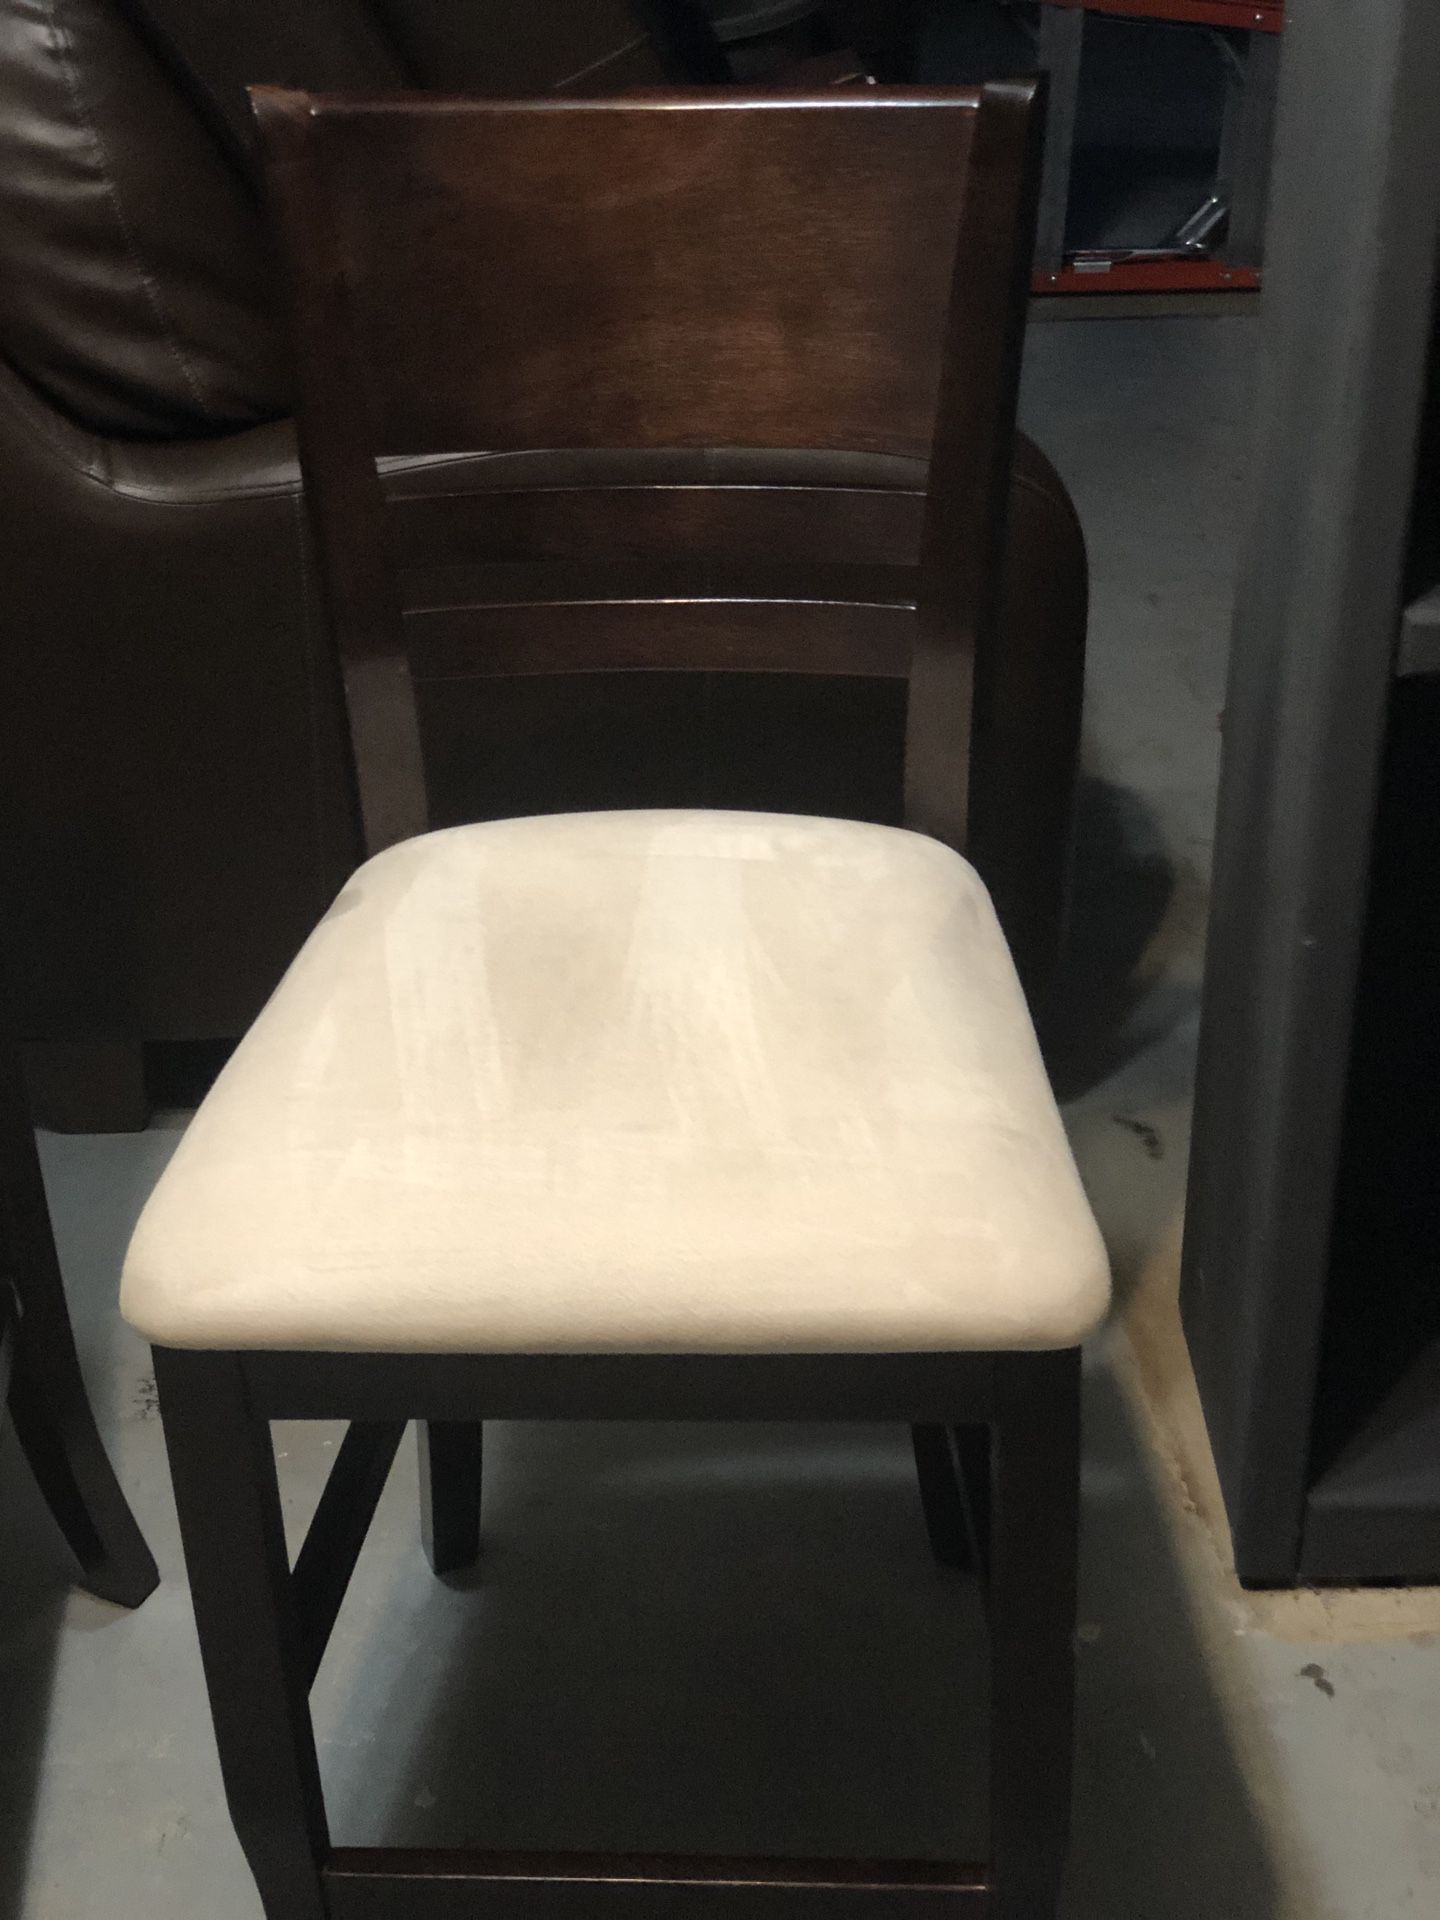 Ashley Furniture Bistro Expandable Table/4 Chairs